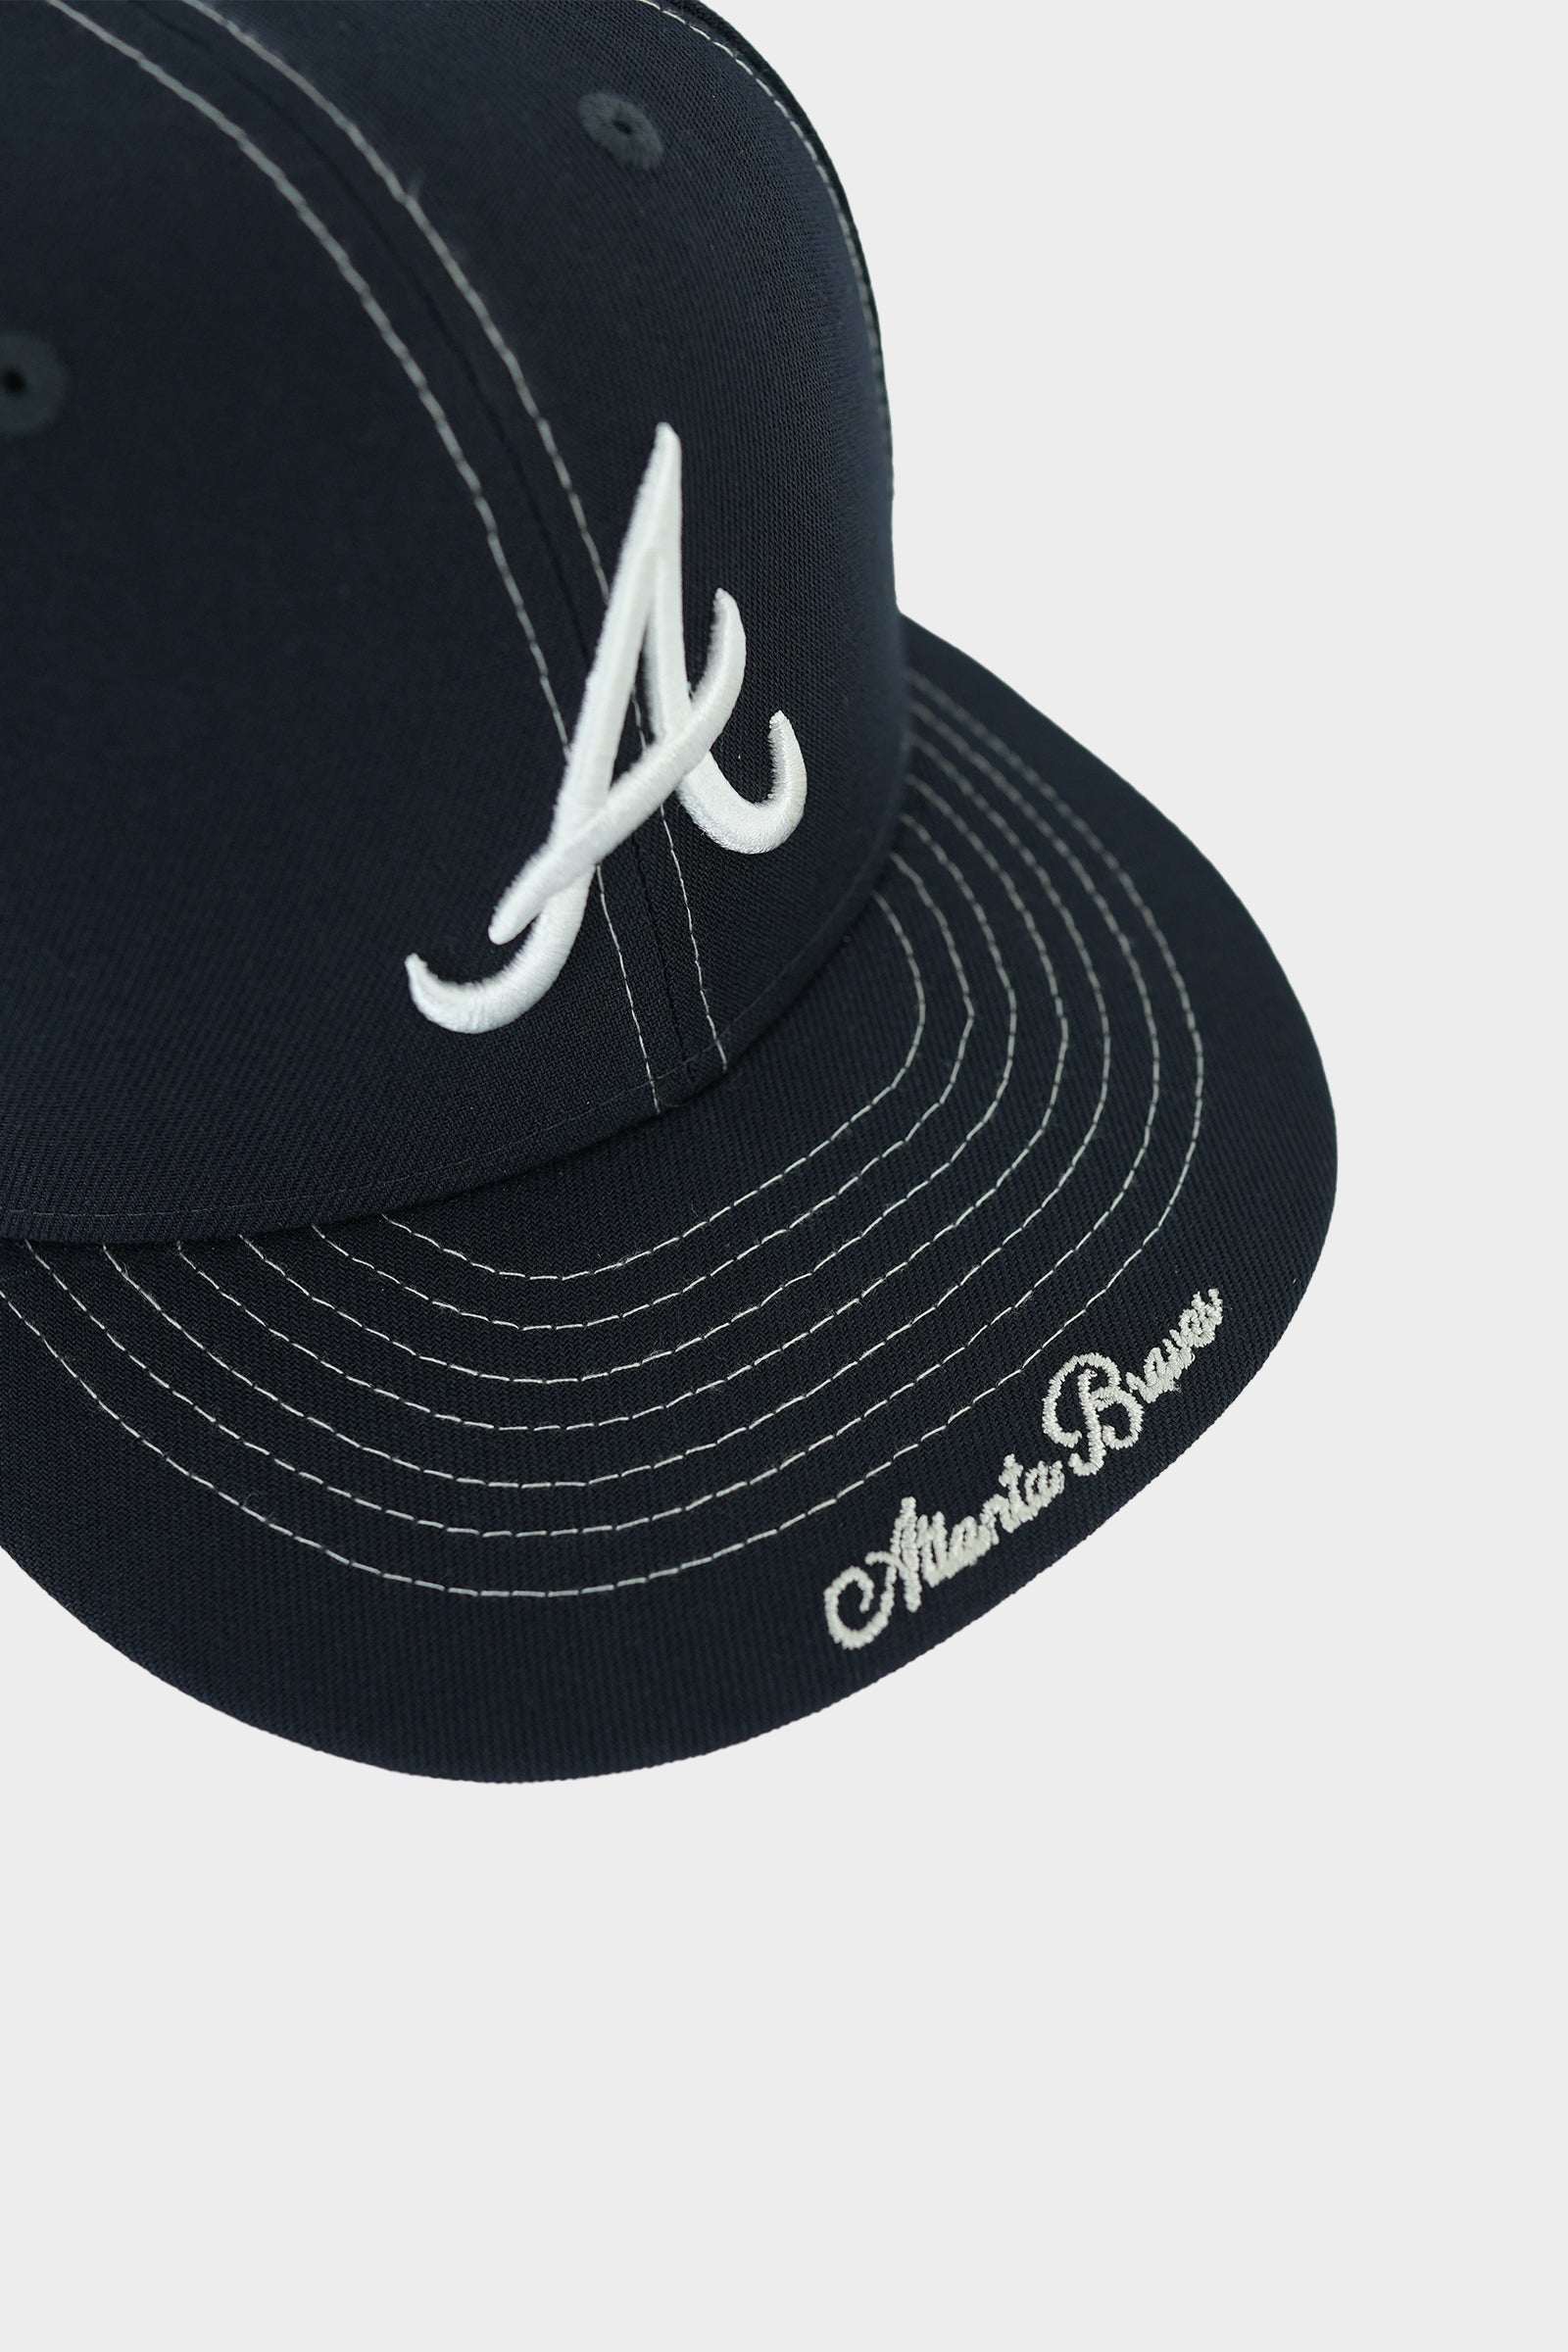 Atlanta Braves Contrast Stitch 59Fifty Fitted Cap